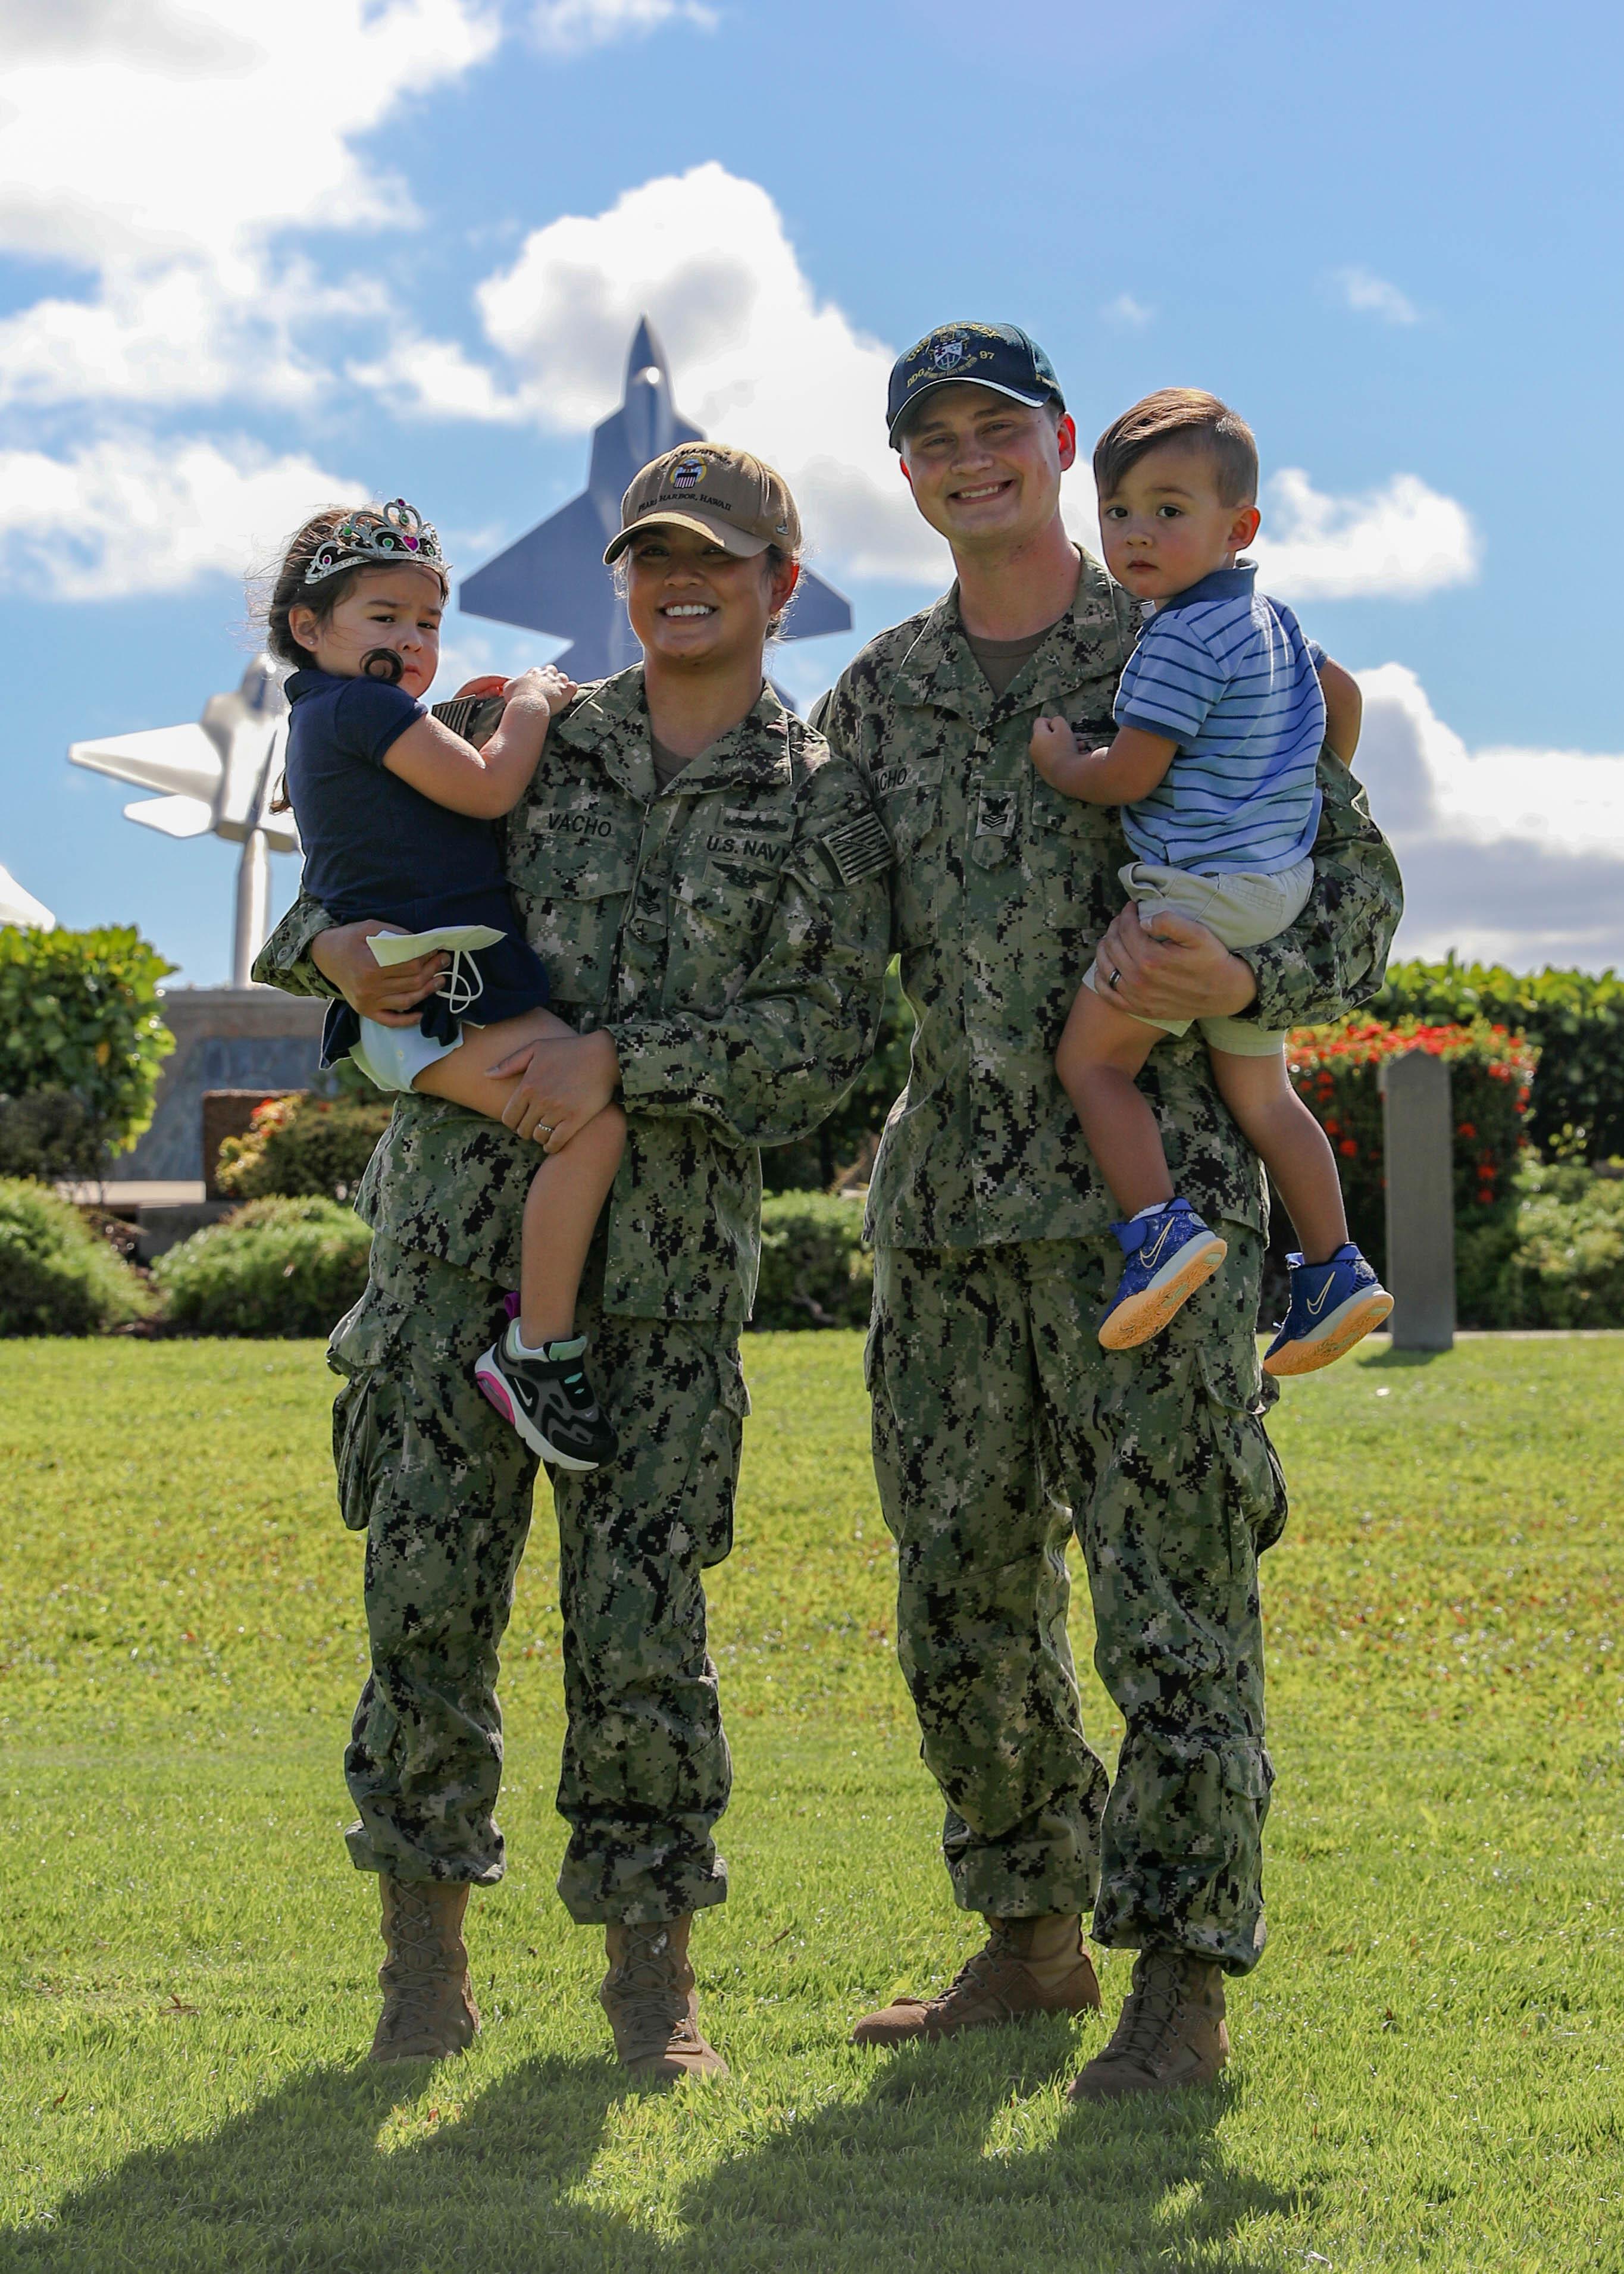 Navy Family with Kids